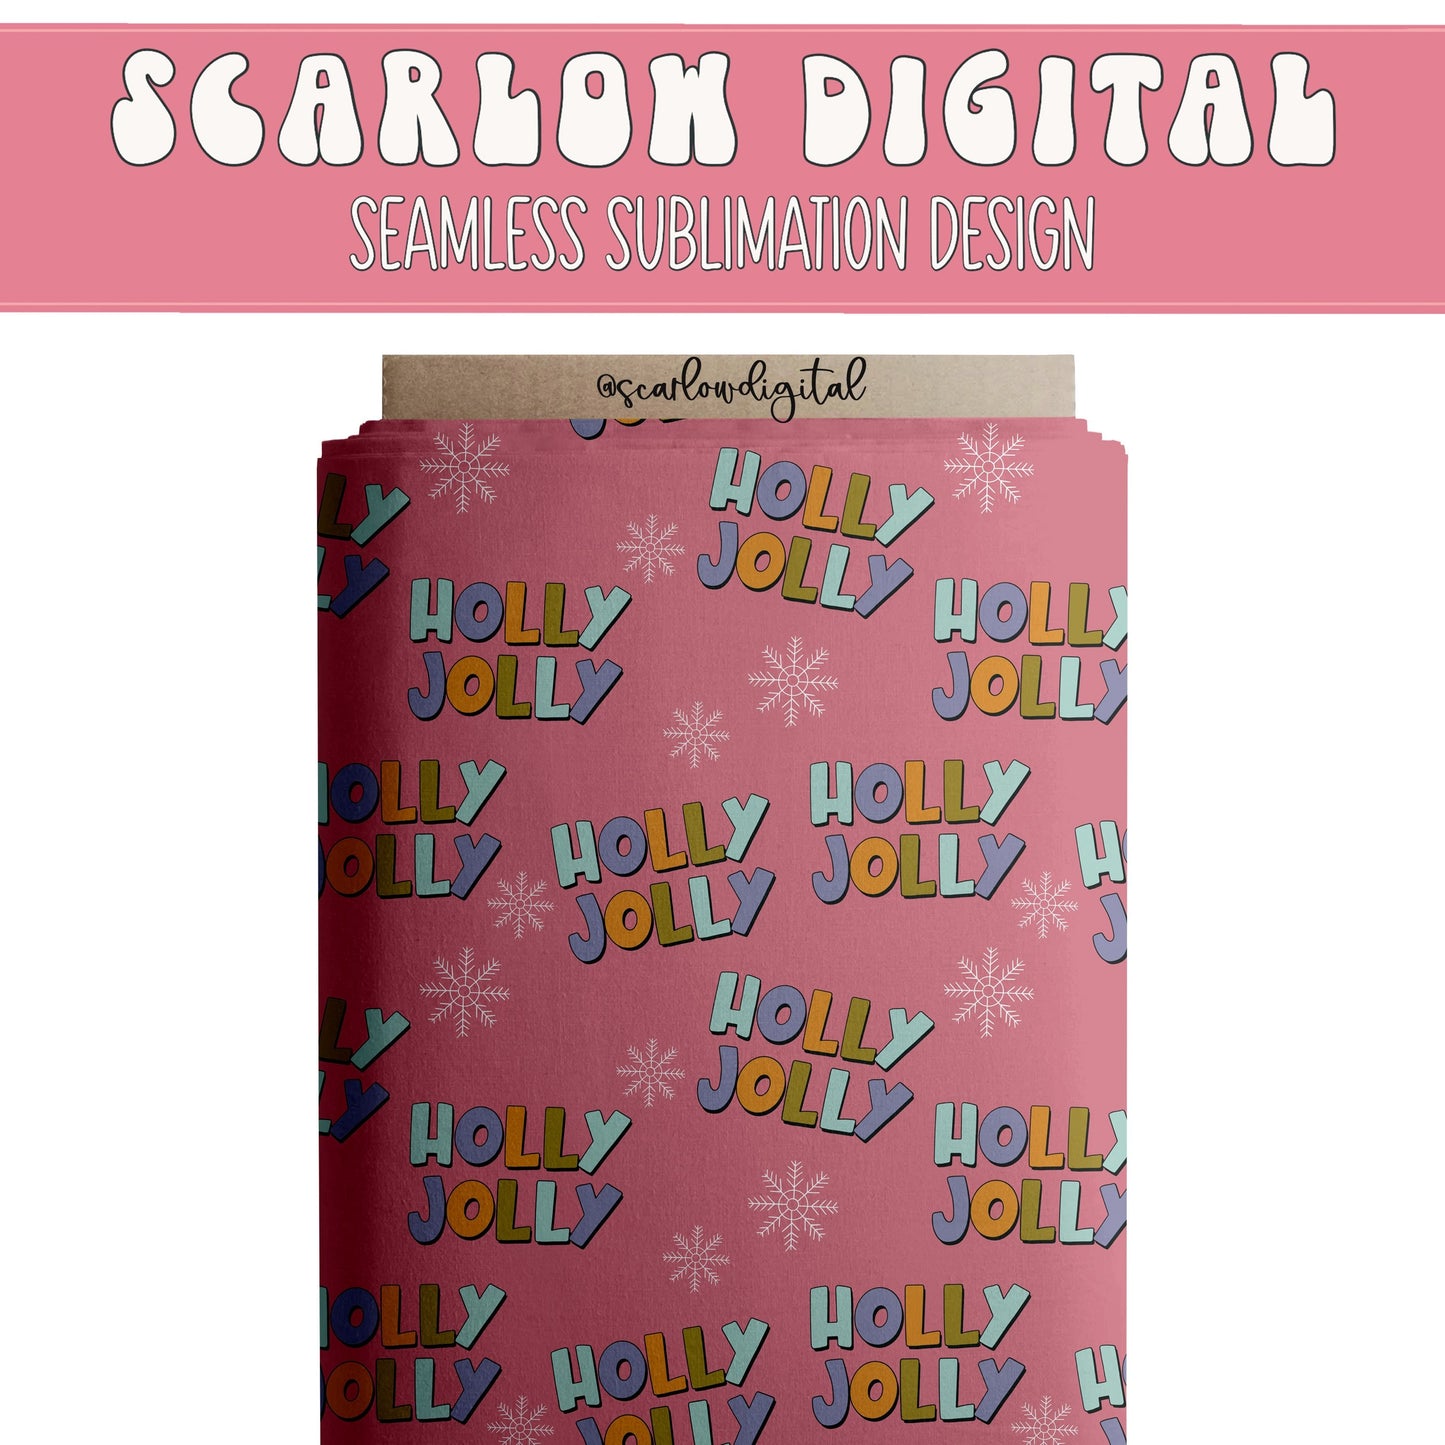 Holly and Jolly Seamless Pattern-Christmas Sublimation Digital Design Download-girly Christmas seamless file, groovy Xmas seamless designs